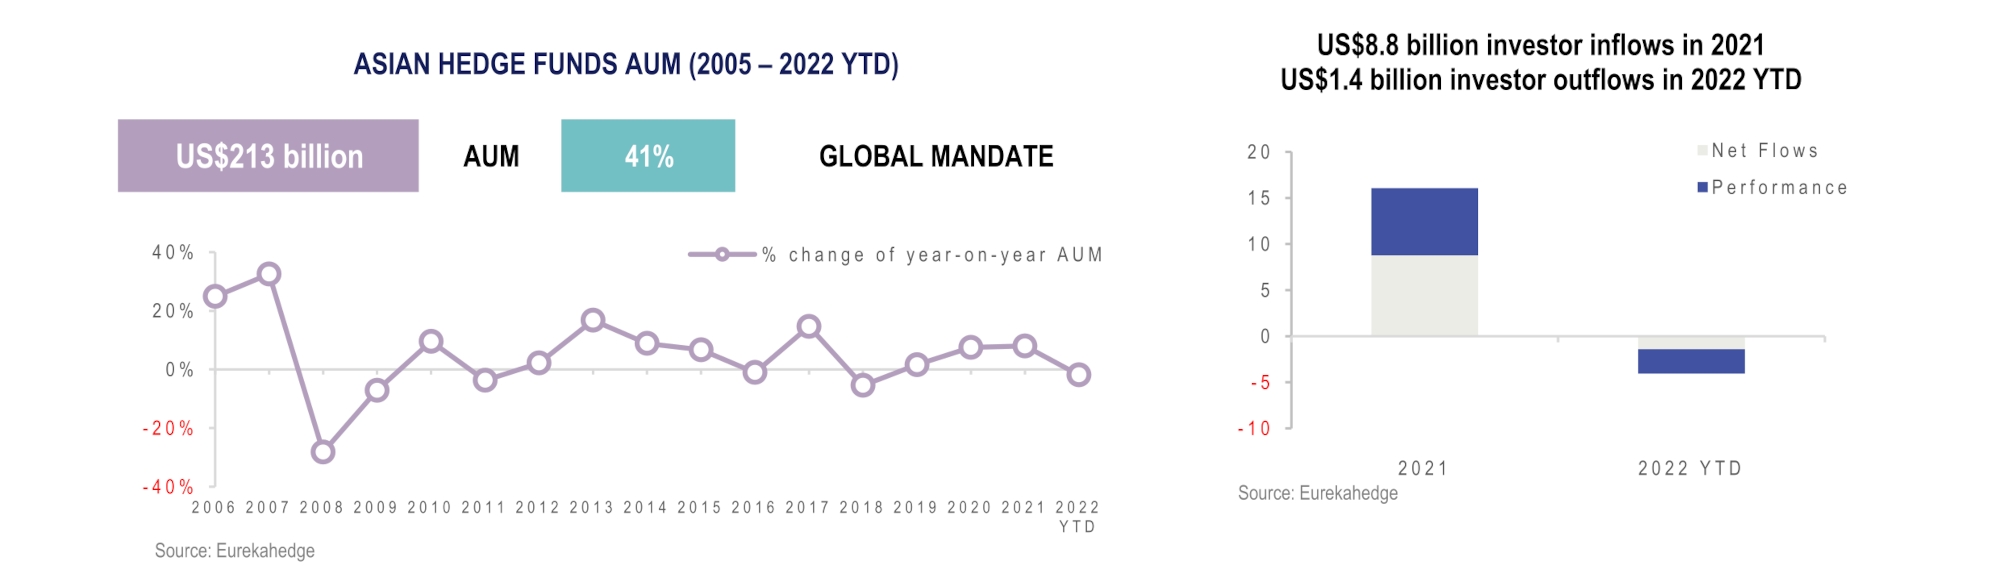 Asian Hedge Funds Infographic February 2022 - AUM